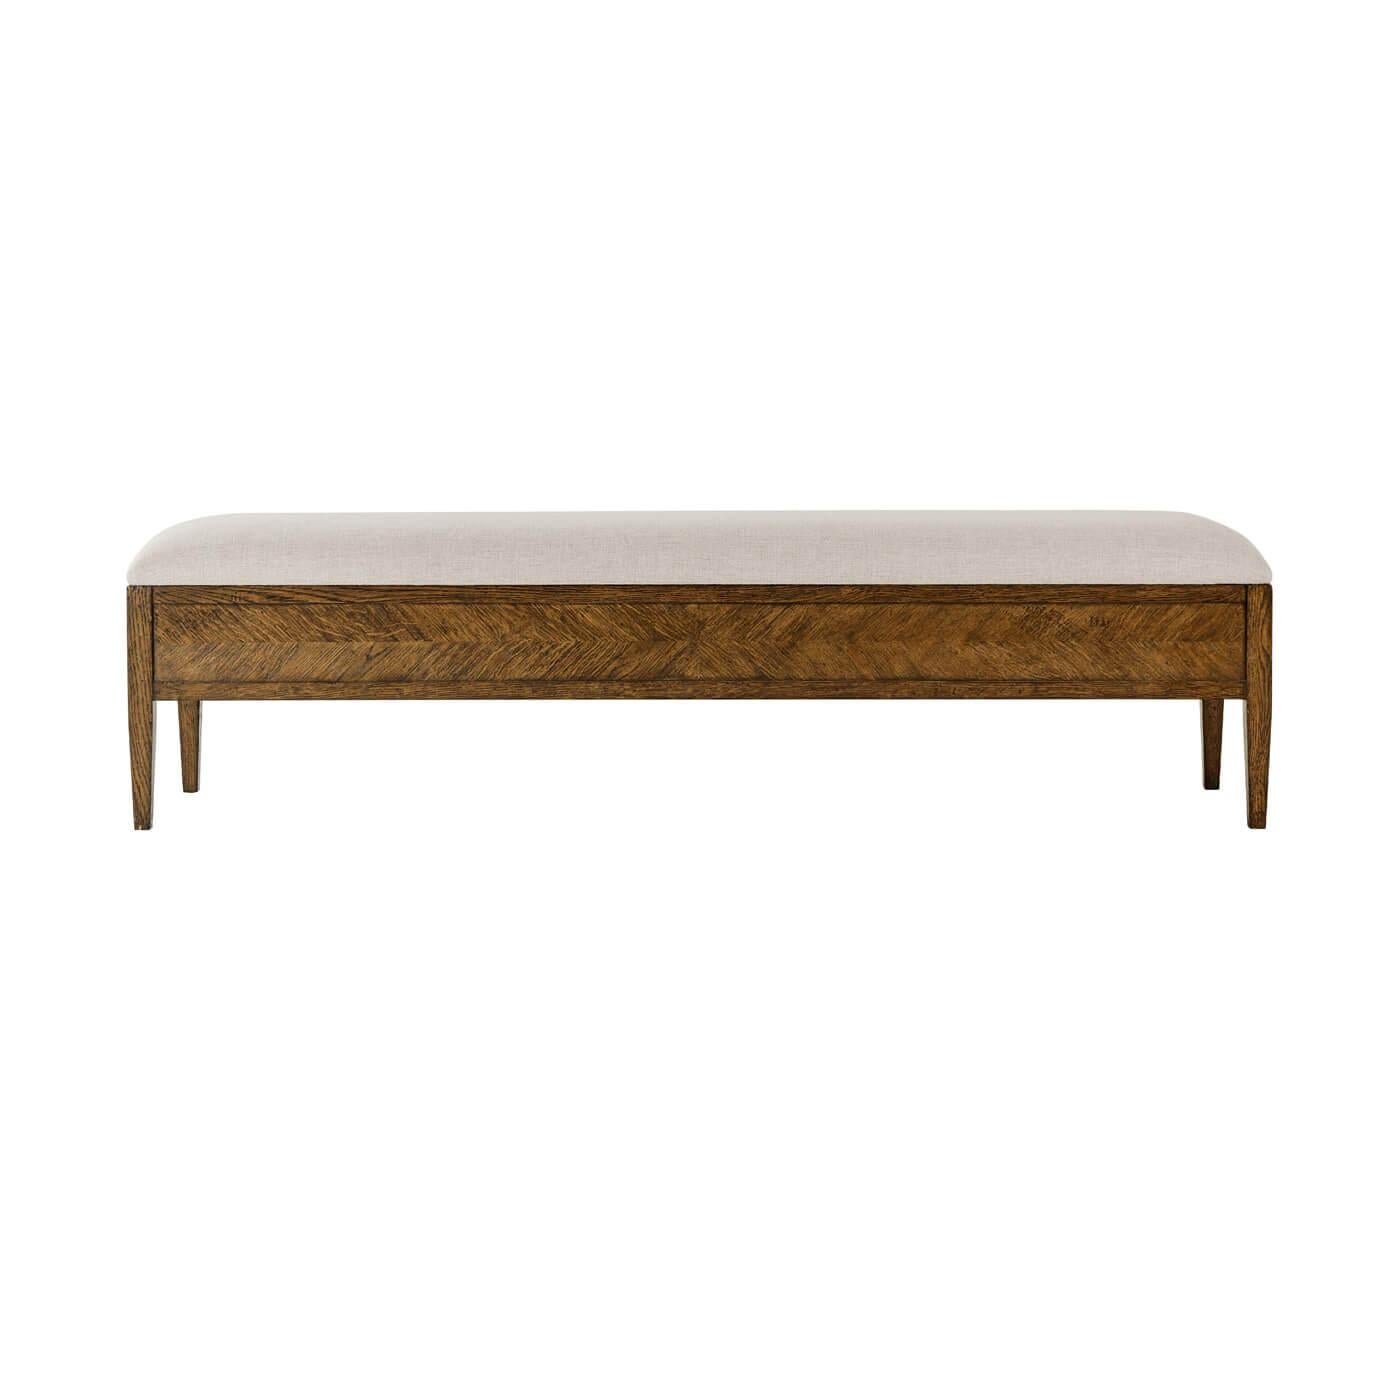 A dark oak parquetry upholstered bench with tapered legs. Crafted with rustic oak with an upholstered seat, this bench is the perfect addition to the foot of any bed or entryway. 
Shown in Dusk Finish
Shown in Linen-UP5409 fabric
Dimensions
62